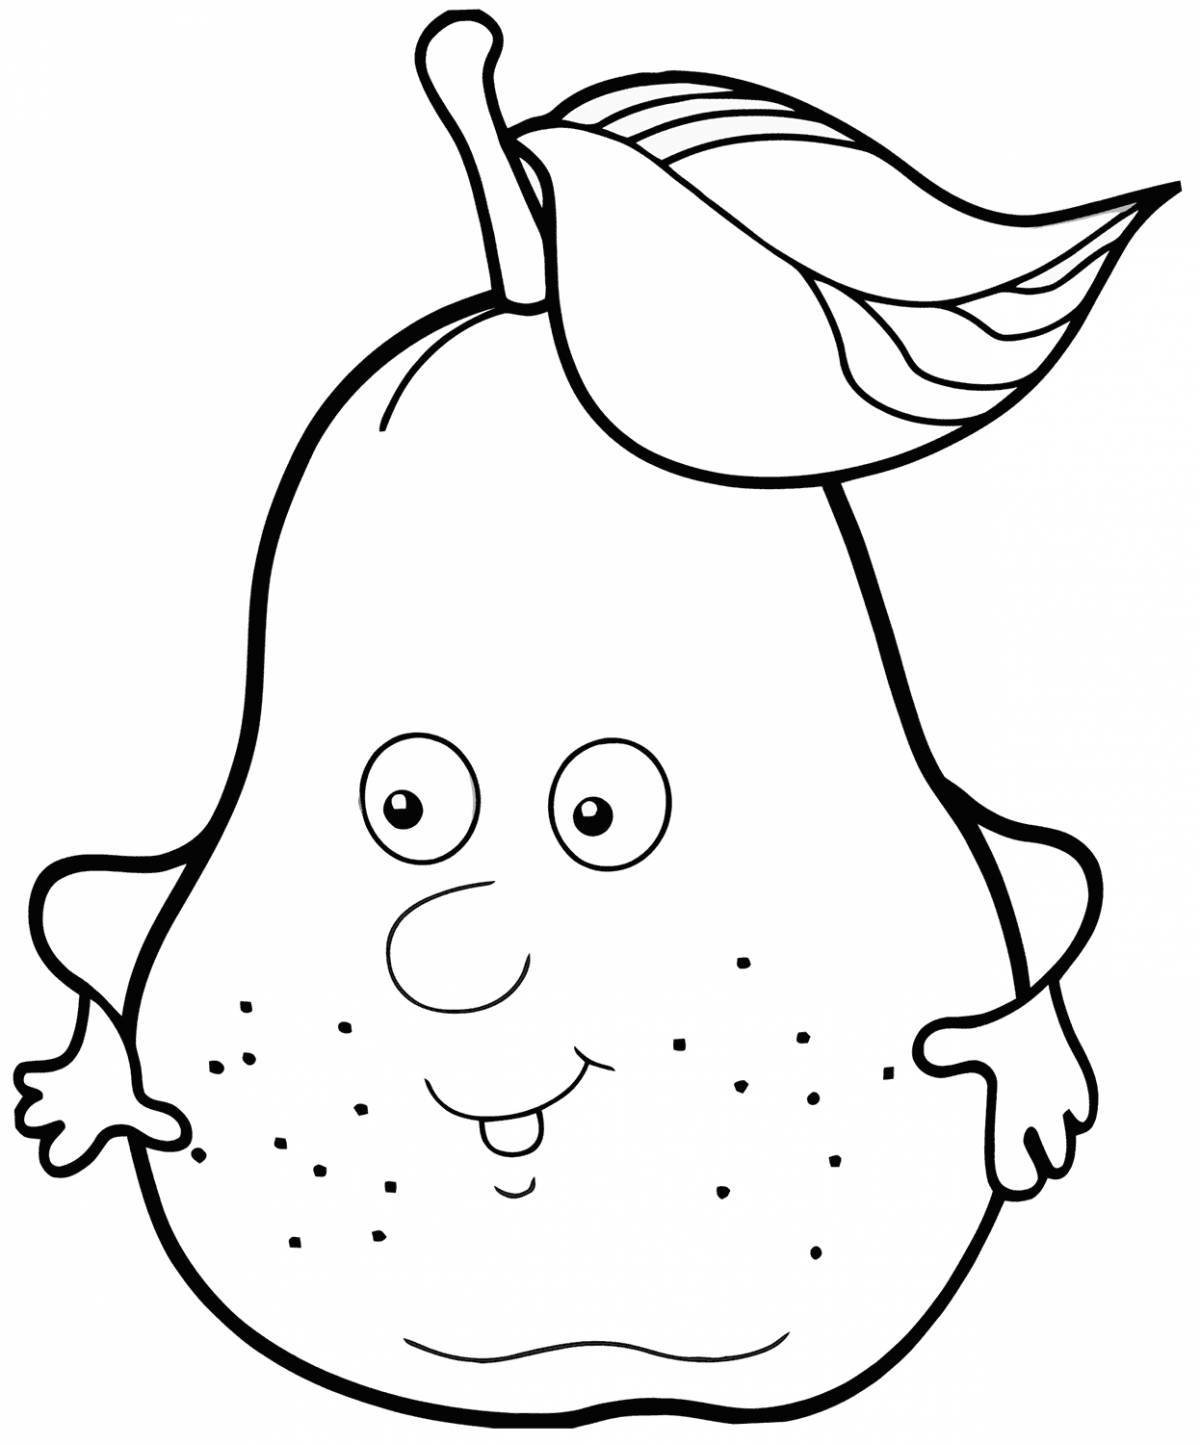 Fun coloring pear for babies